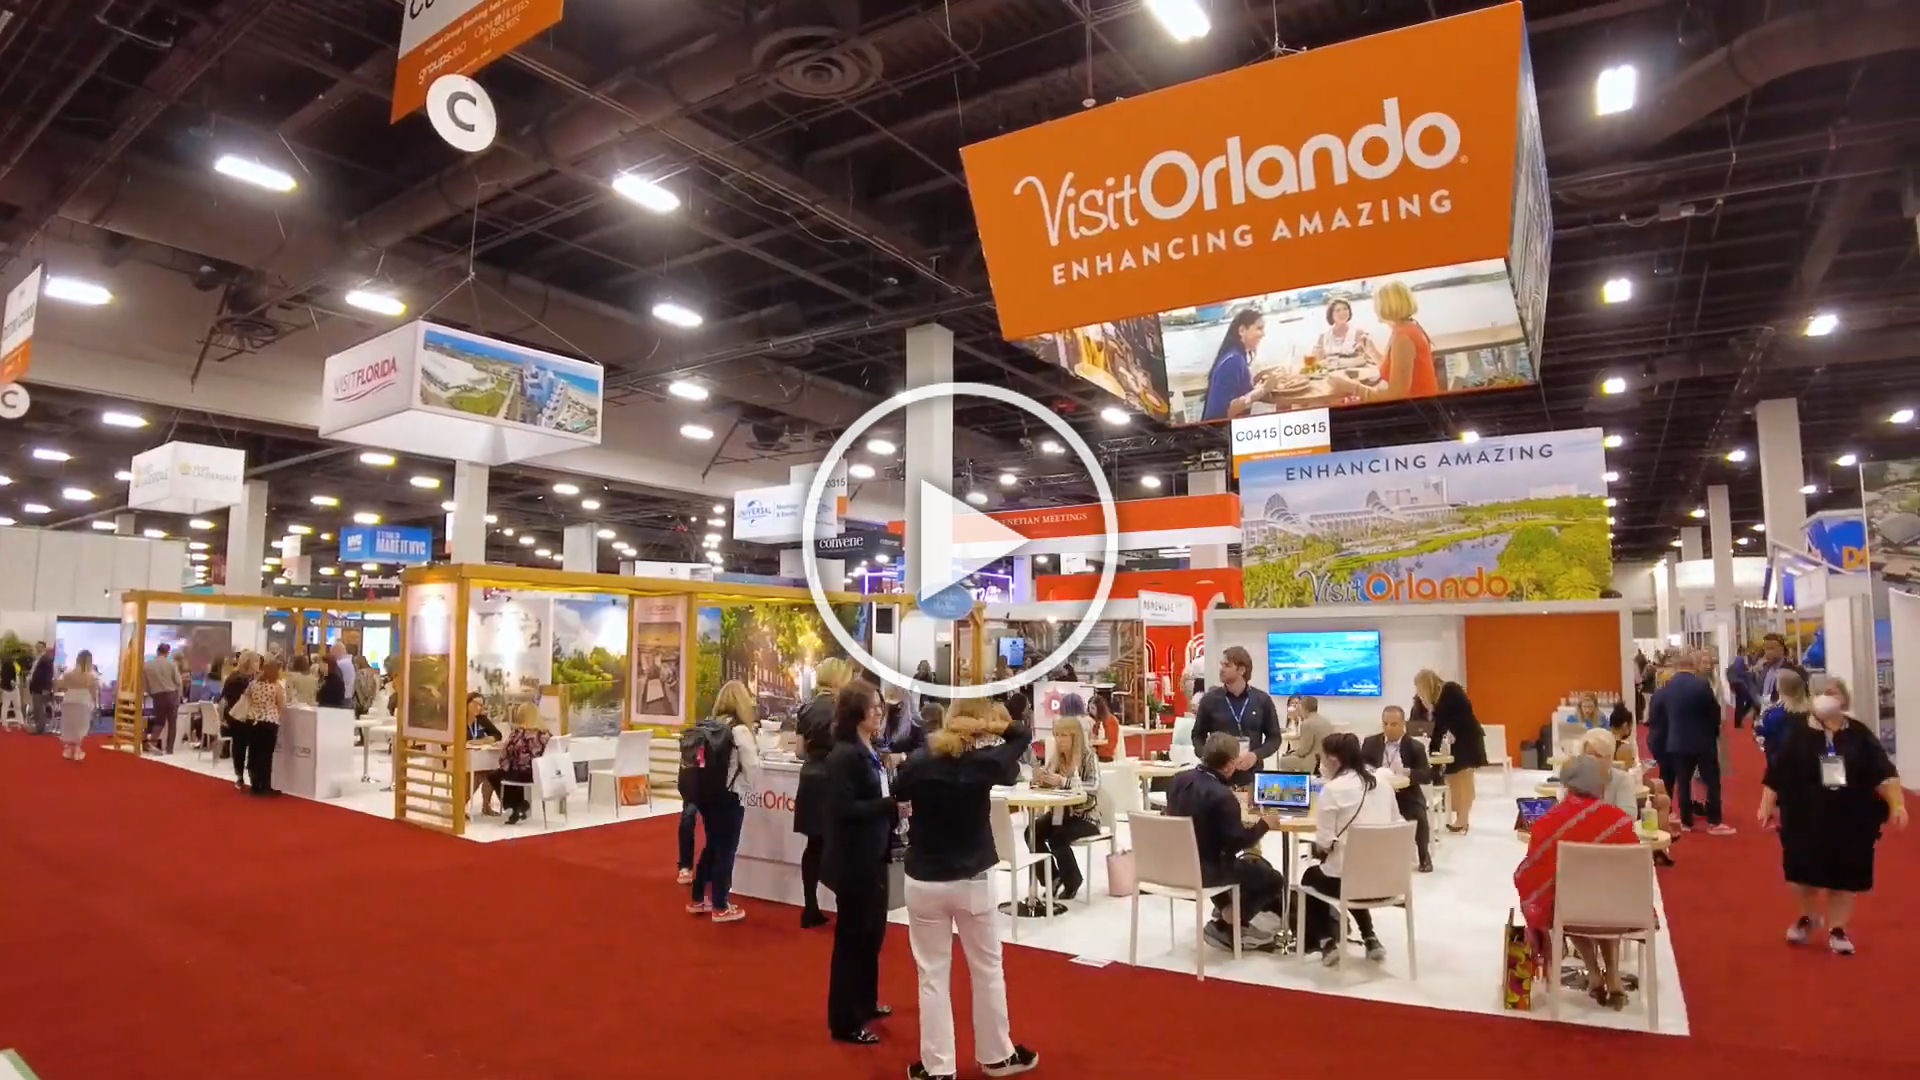 A highlight reel of our activities at IMEX